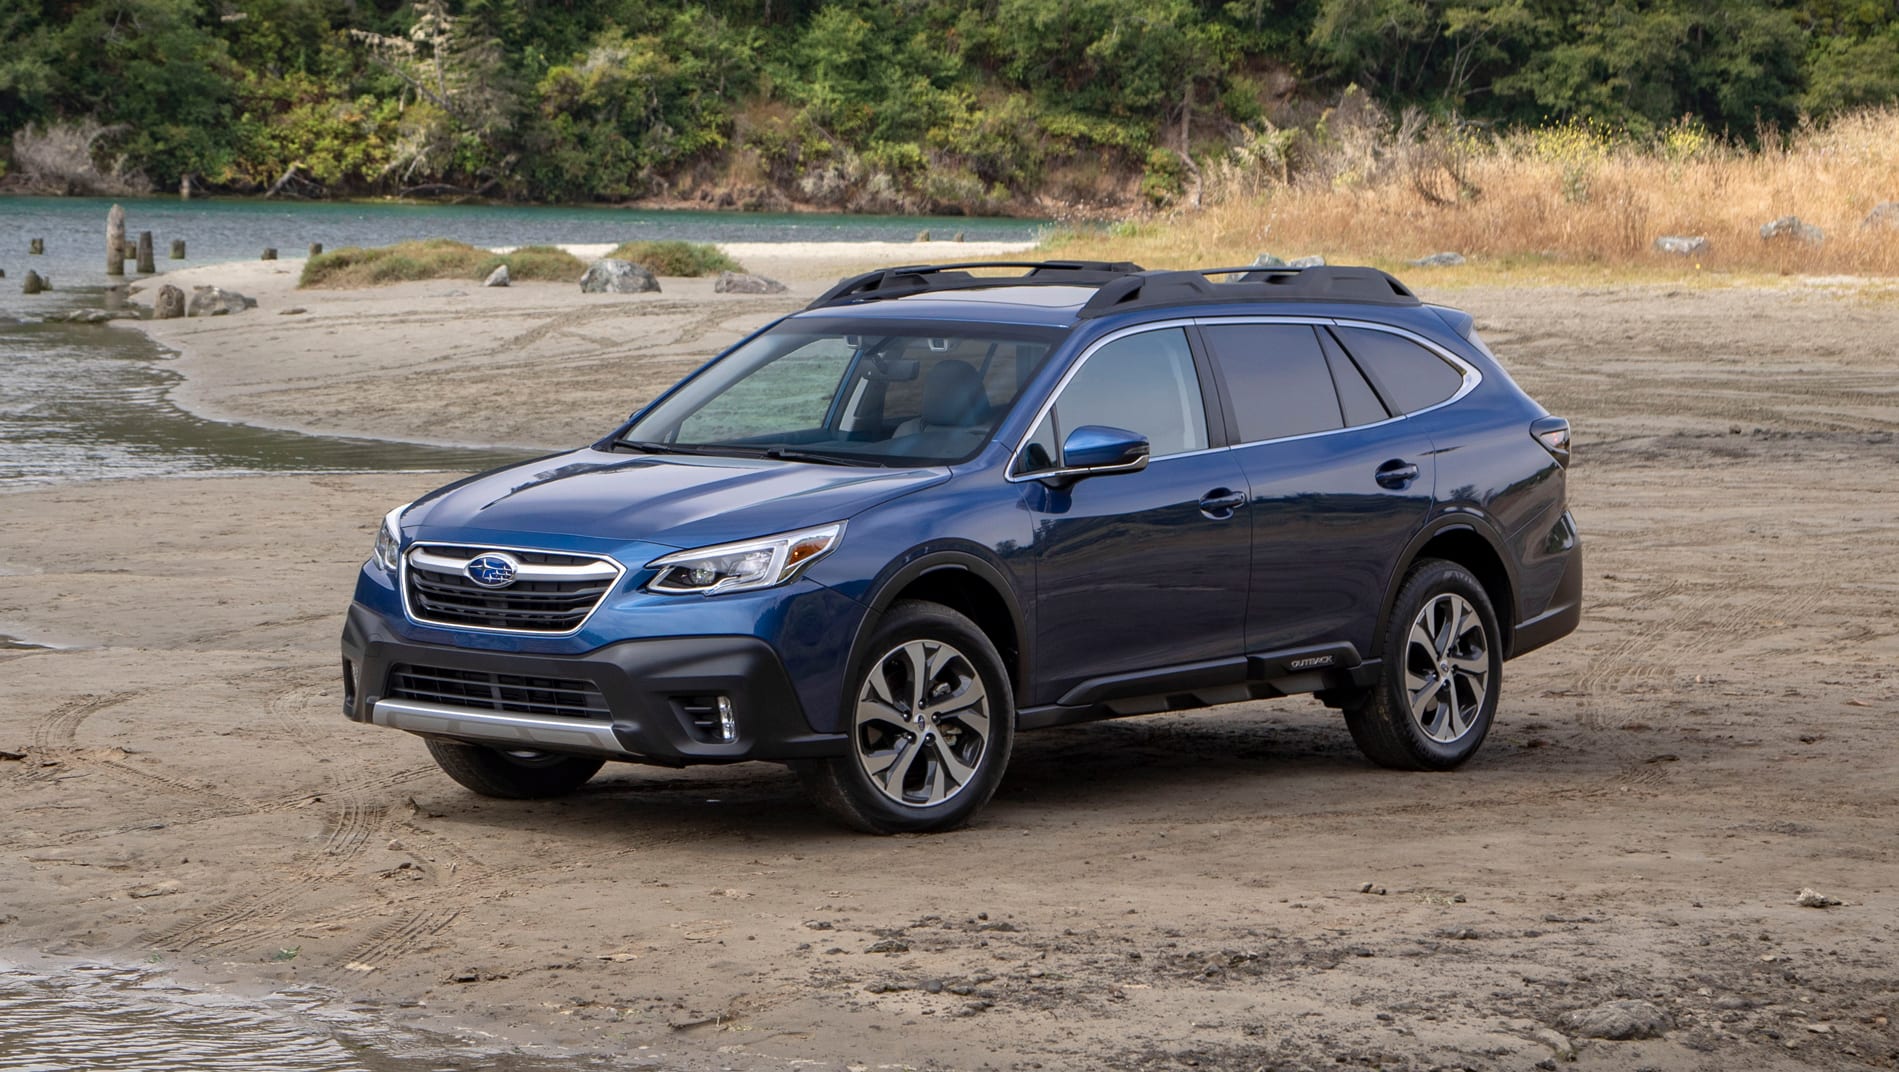 New Subaru Outback 12 detailed: When will the sixth-generation